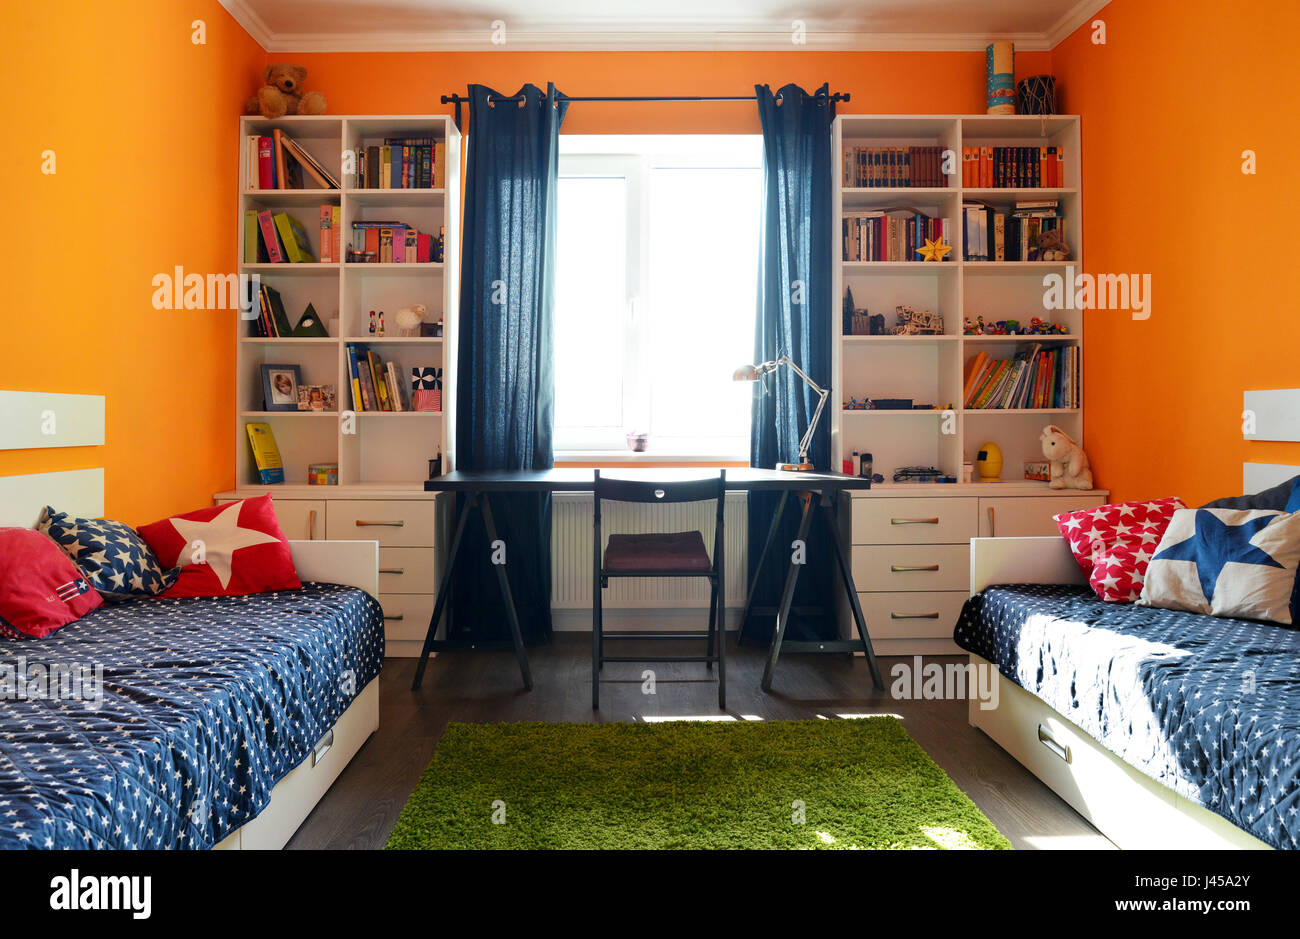 Kids Bedroom In Orange And Blue Colors With Two Beds And Bookcases Stock Photo Alamy